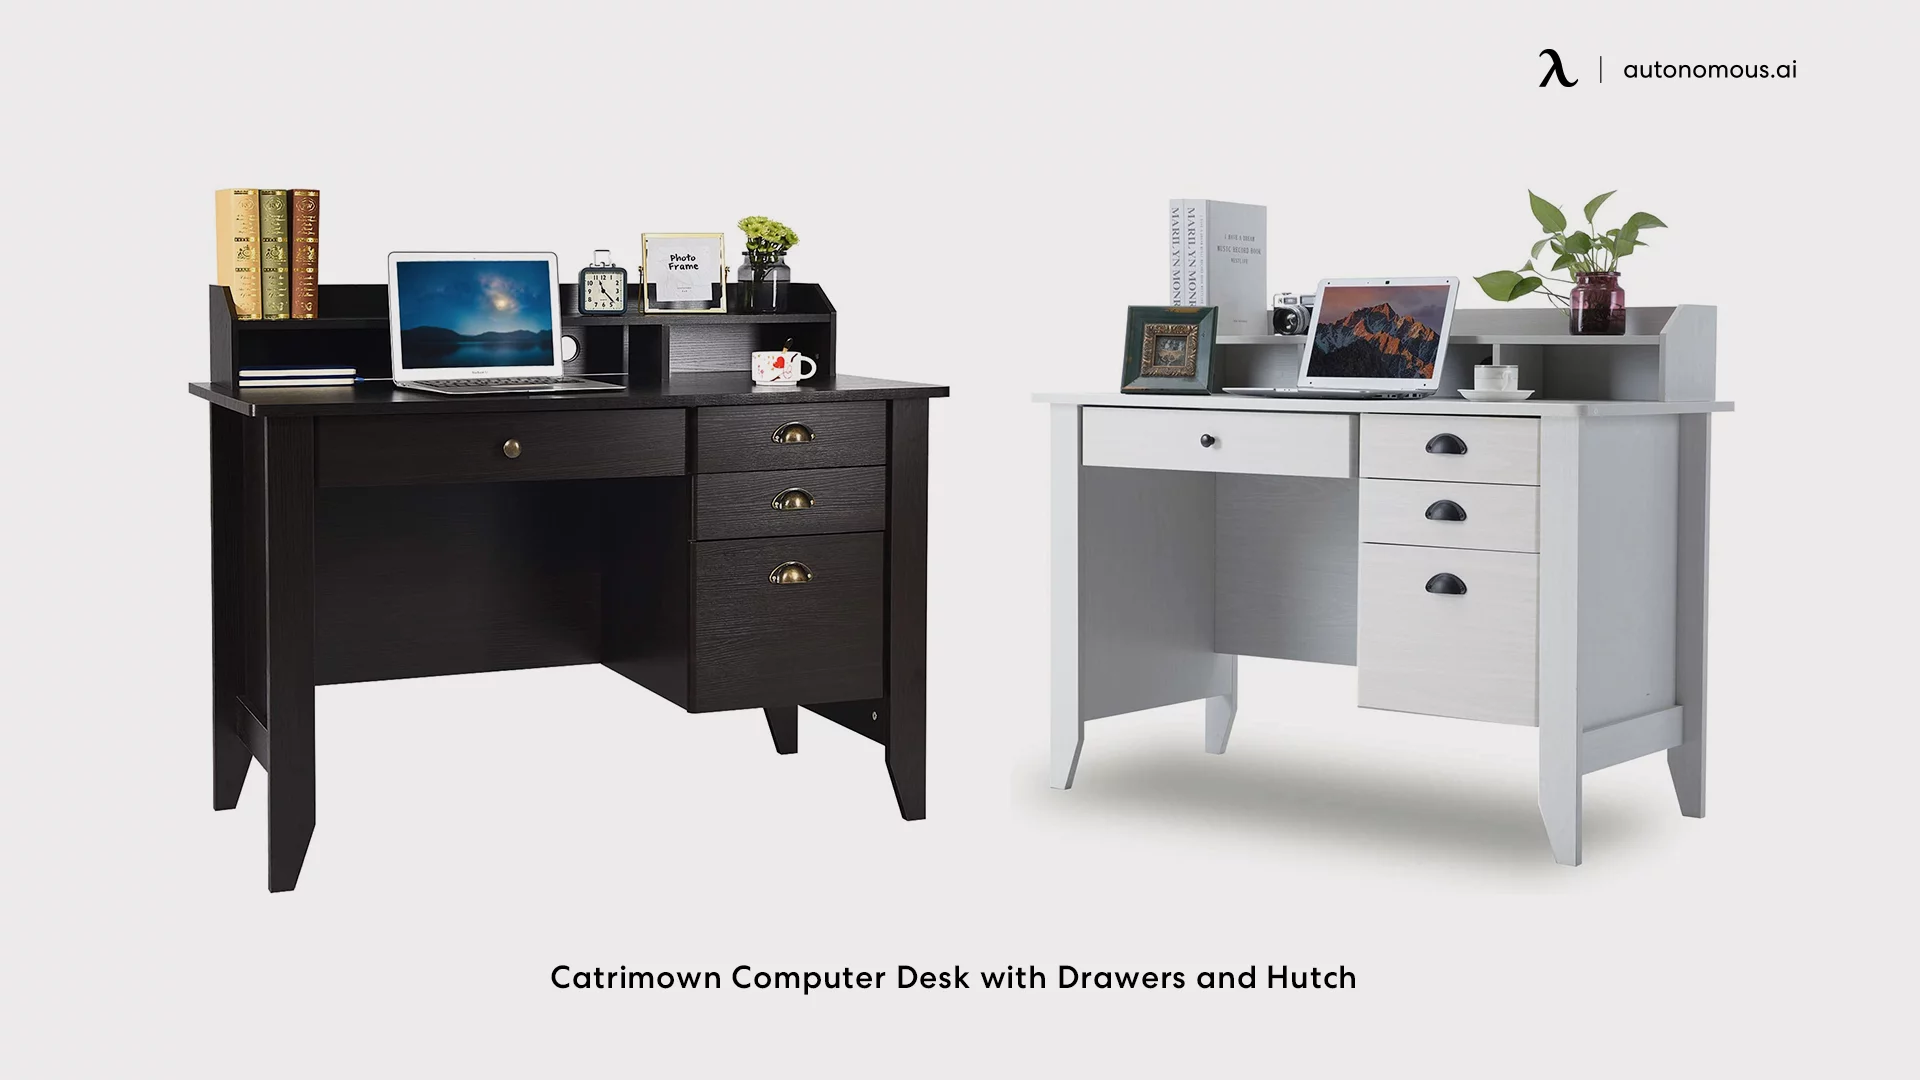 Catrimown Computer Desk with Drawers and Hutch